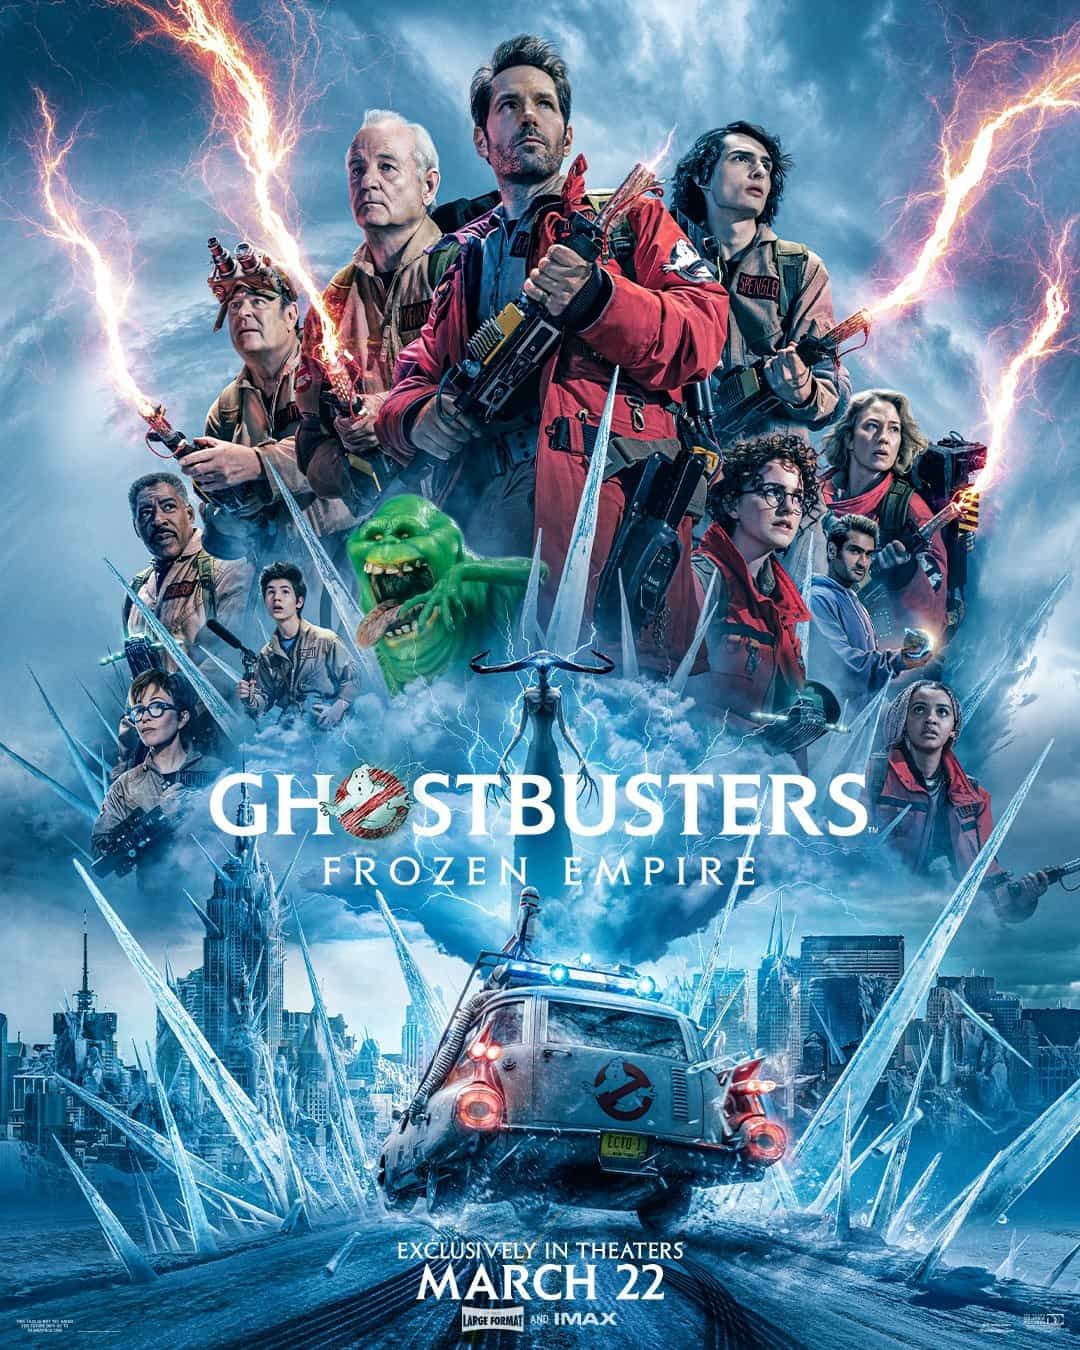 New poster has been released for Ghostbusters: Frozen Empire which stars Mckenna Grace and Carrie Coon - movie UK release date 29th March 2024 #ghostbustersfrozenempire